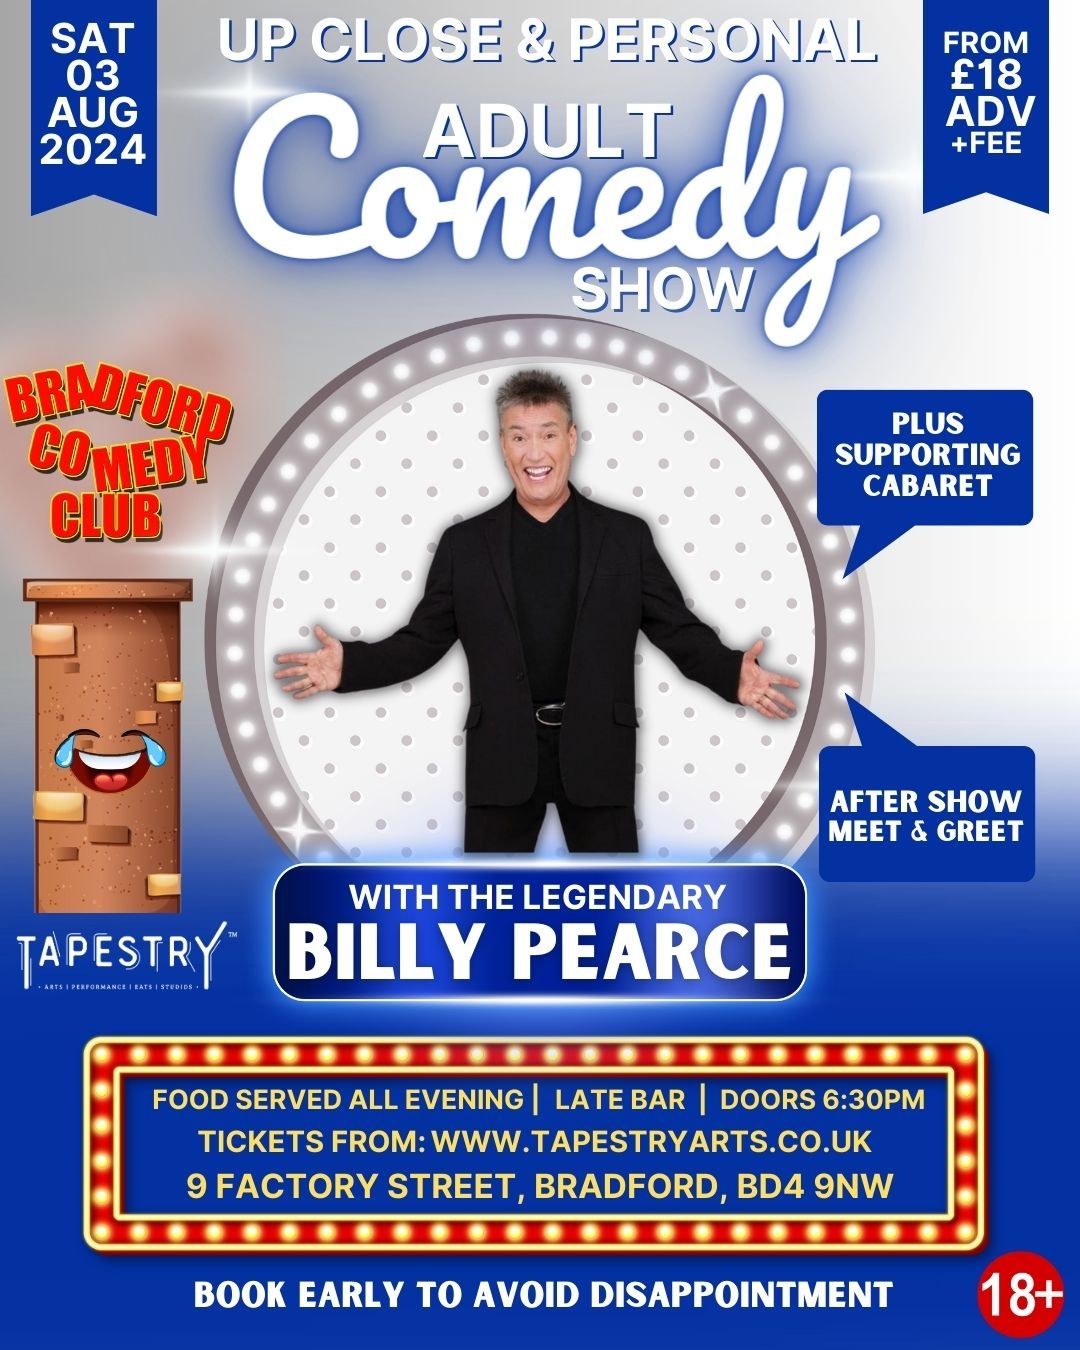 He's back the legendary BILLY PEARCE (Funny Guy) + Special Guest